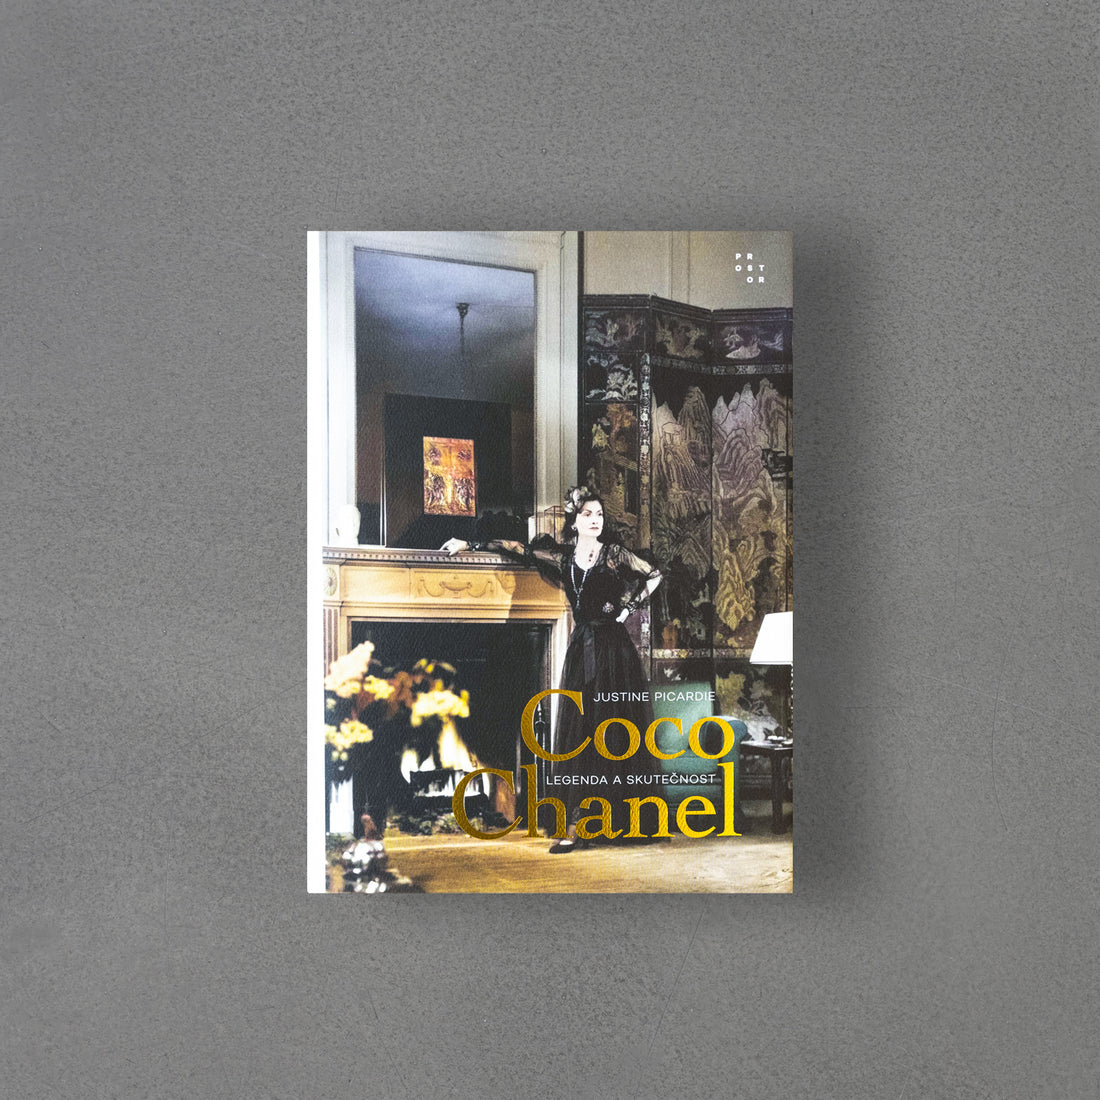 Coco Chanel – Justine Picardie